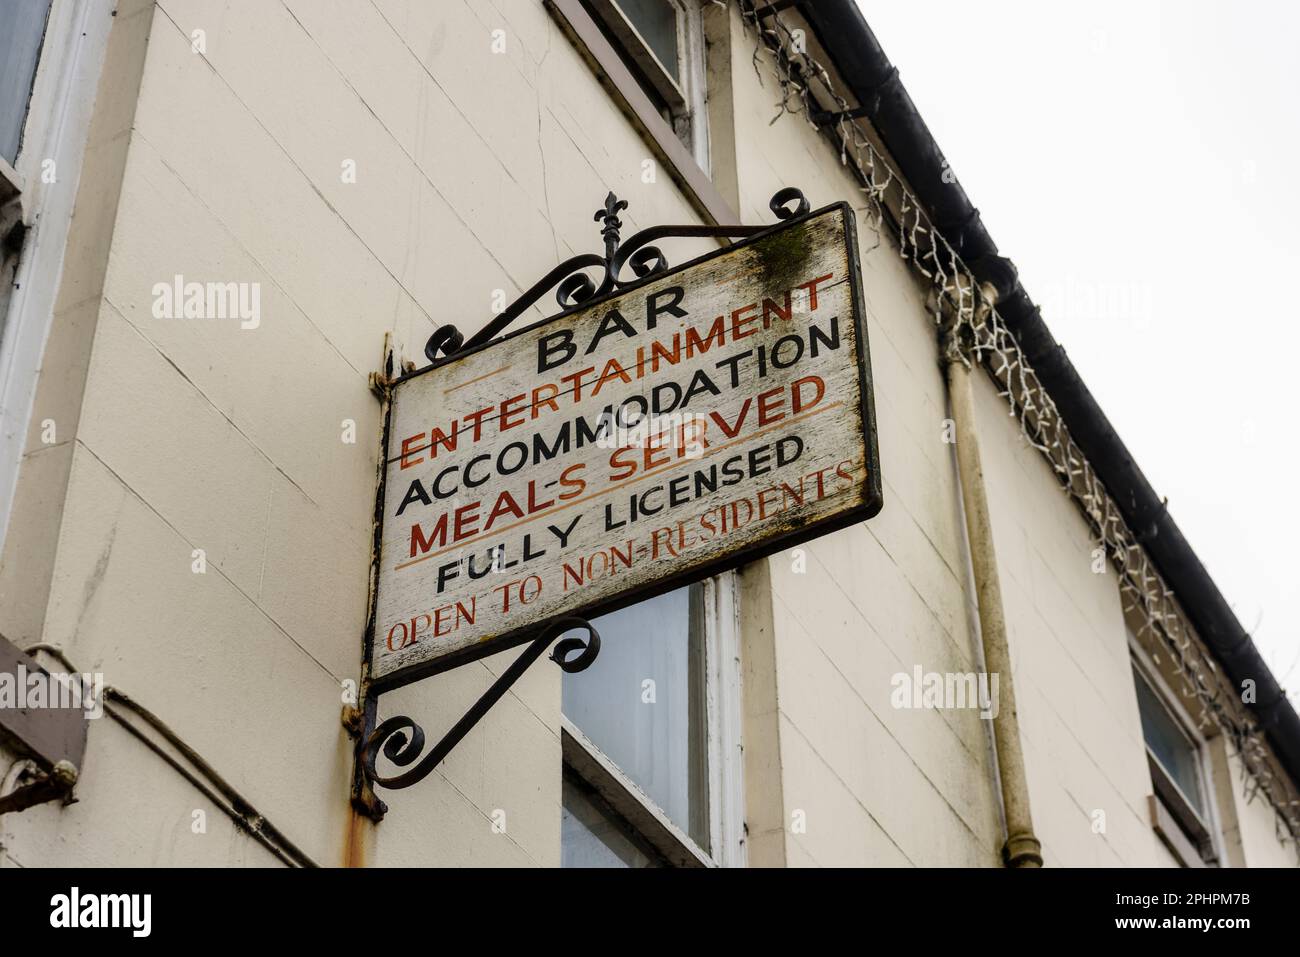 Sign outside a derelict hotel saying "Bar, Entertainment, Accommodation, Meals Served, Fully Licenced, Open to Non-Residents" Stock Photo